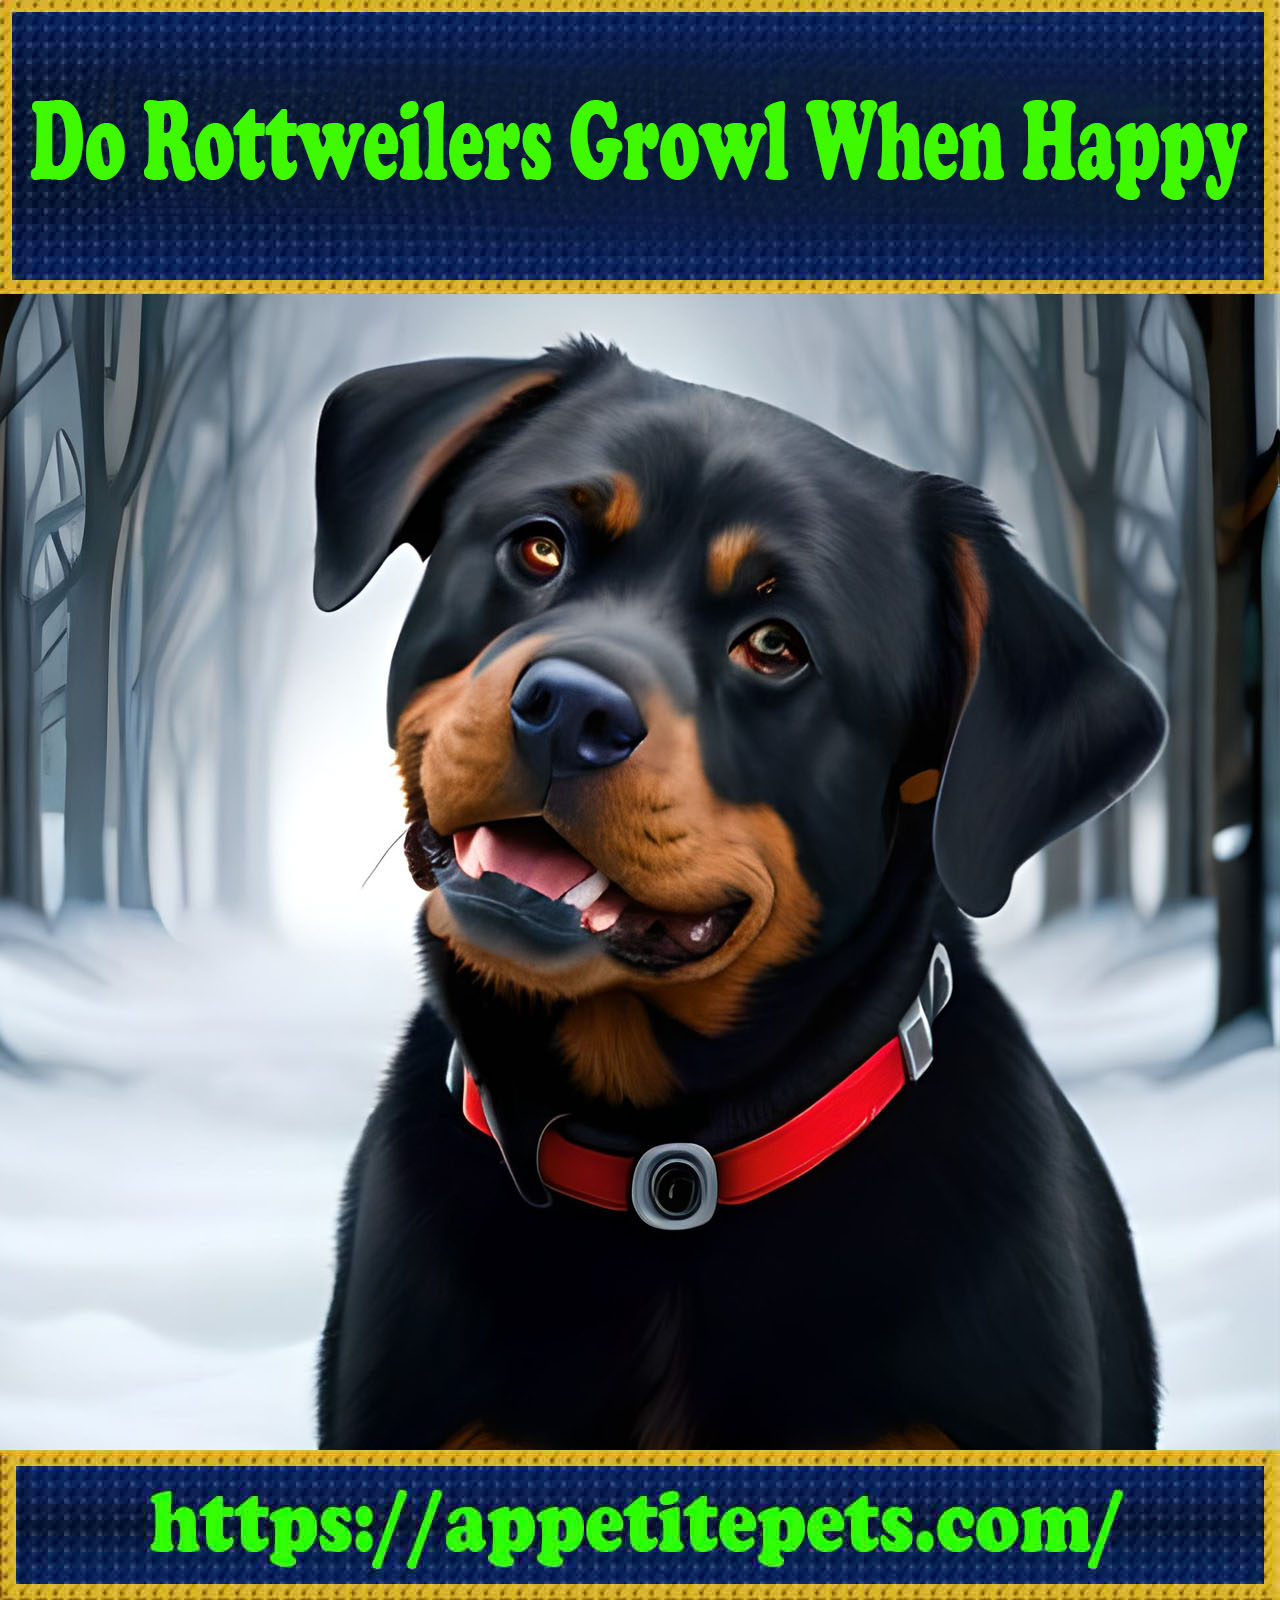 Do Rottweilers Growl When Happy